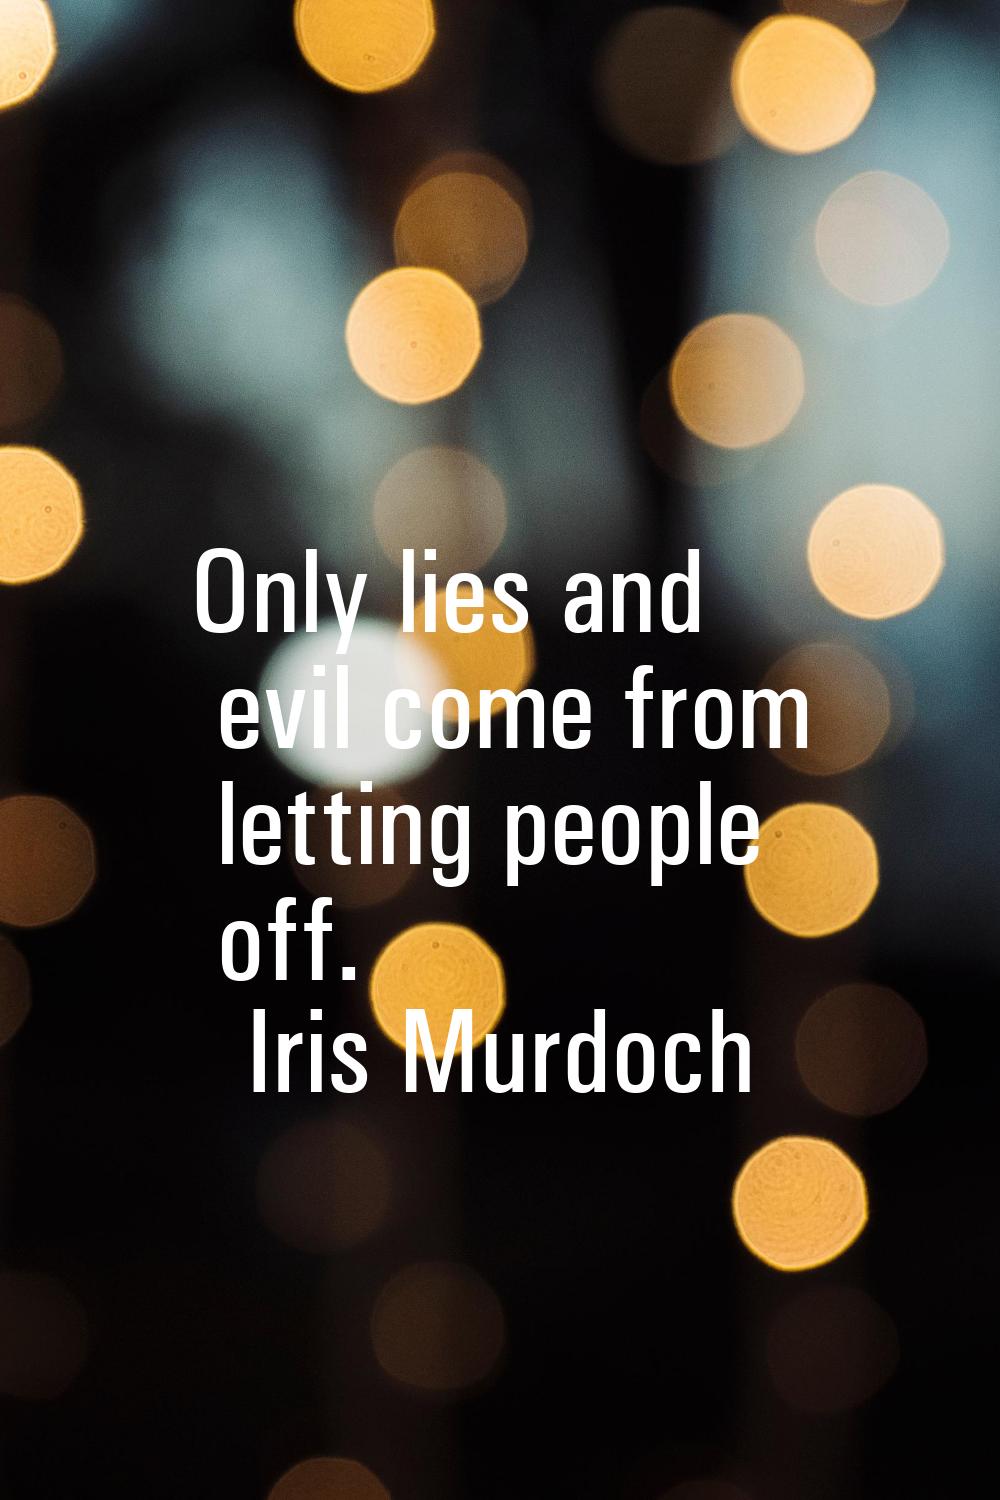 Only lies and evil come from letting people off.